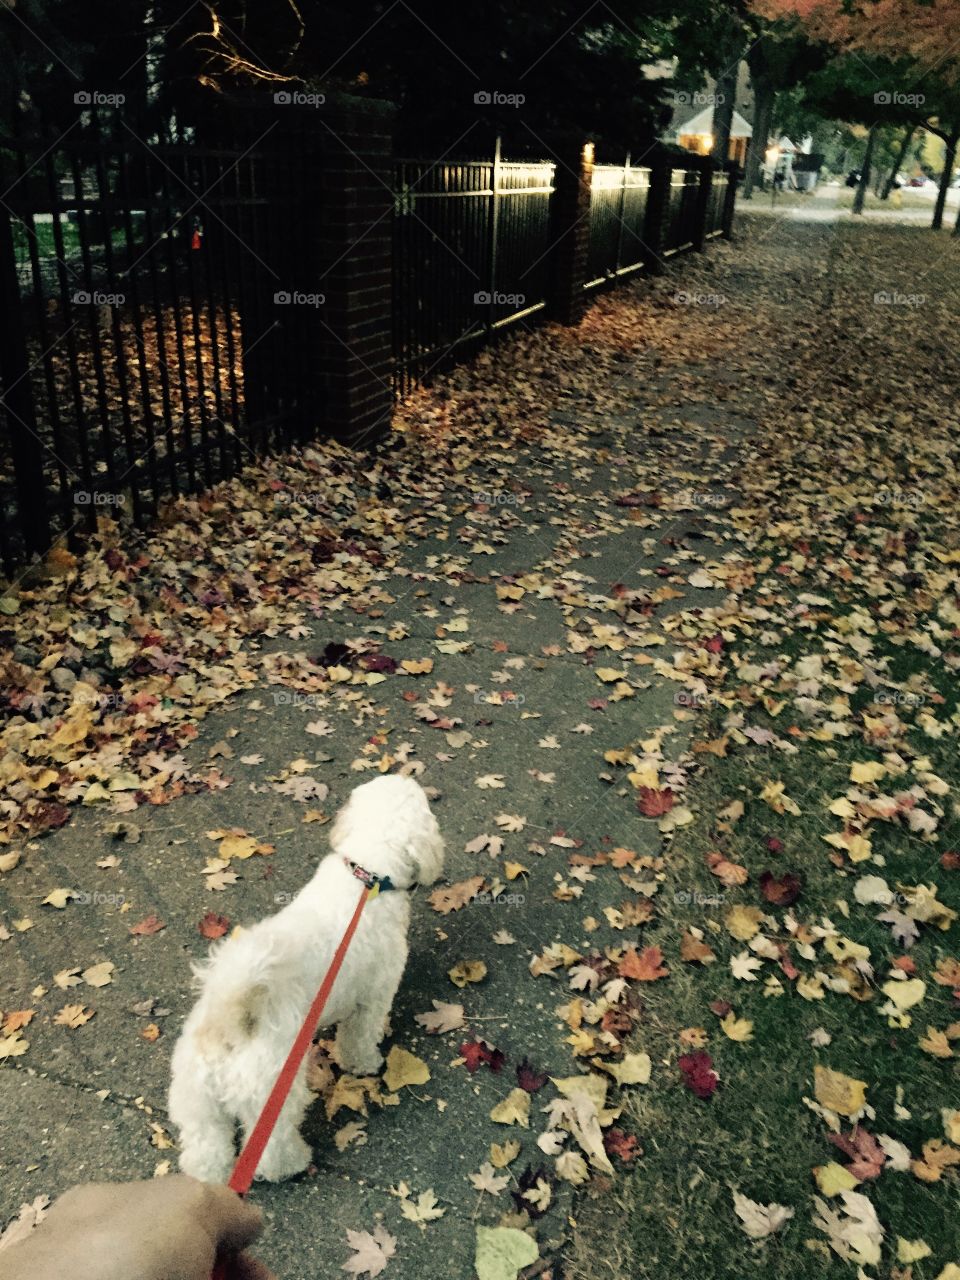 Walking the dog through the leaves